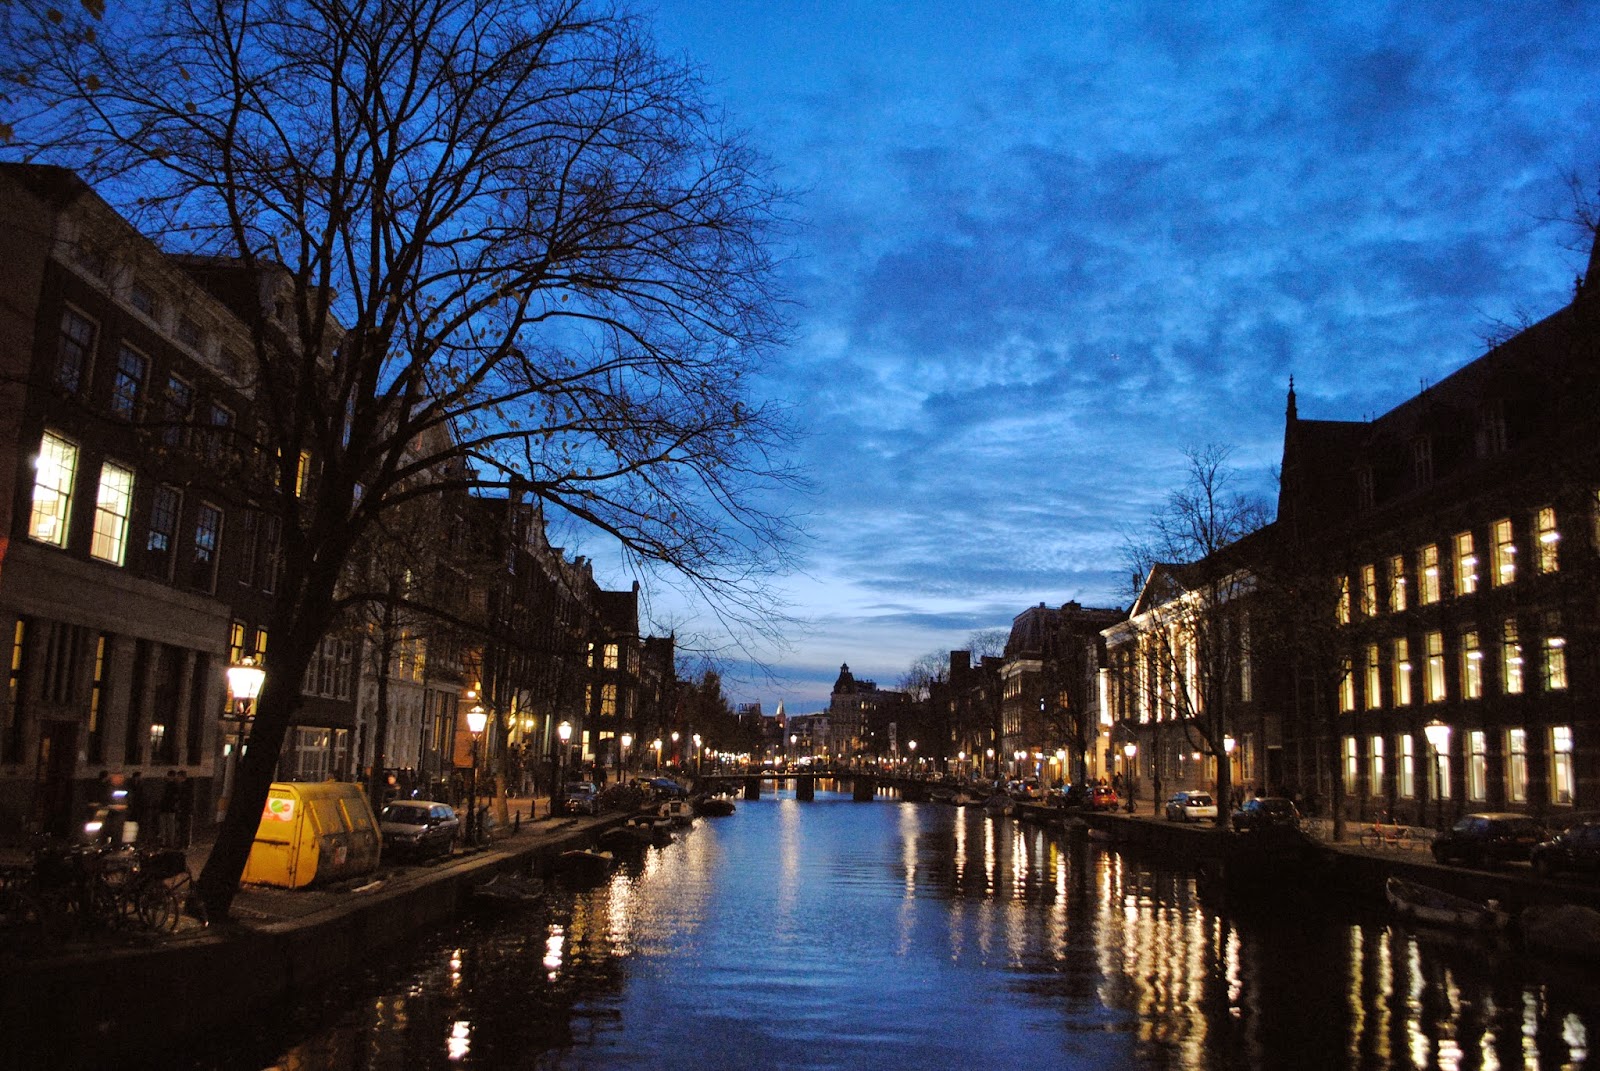 A night-time view of a canal in Amsterdam.